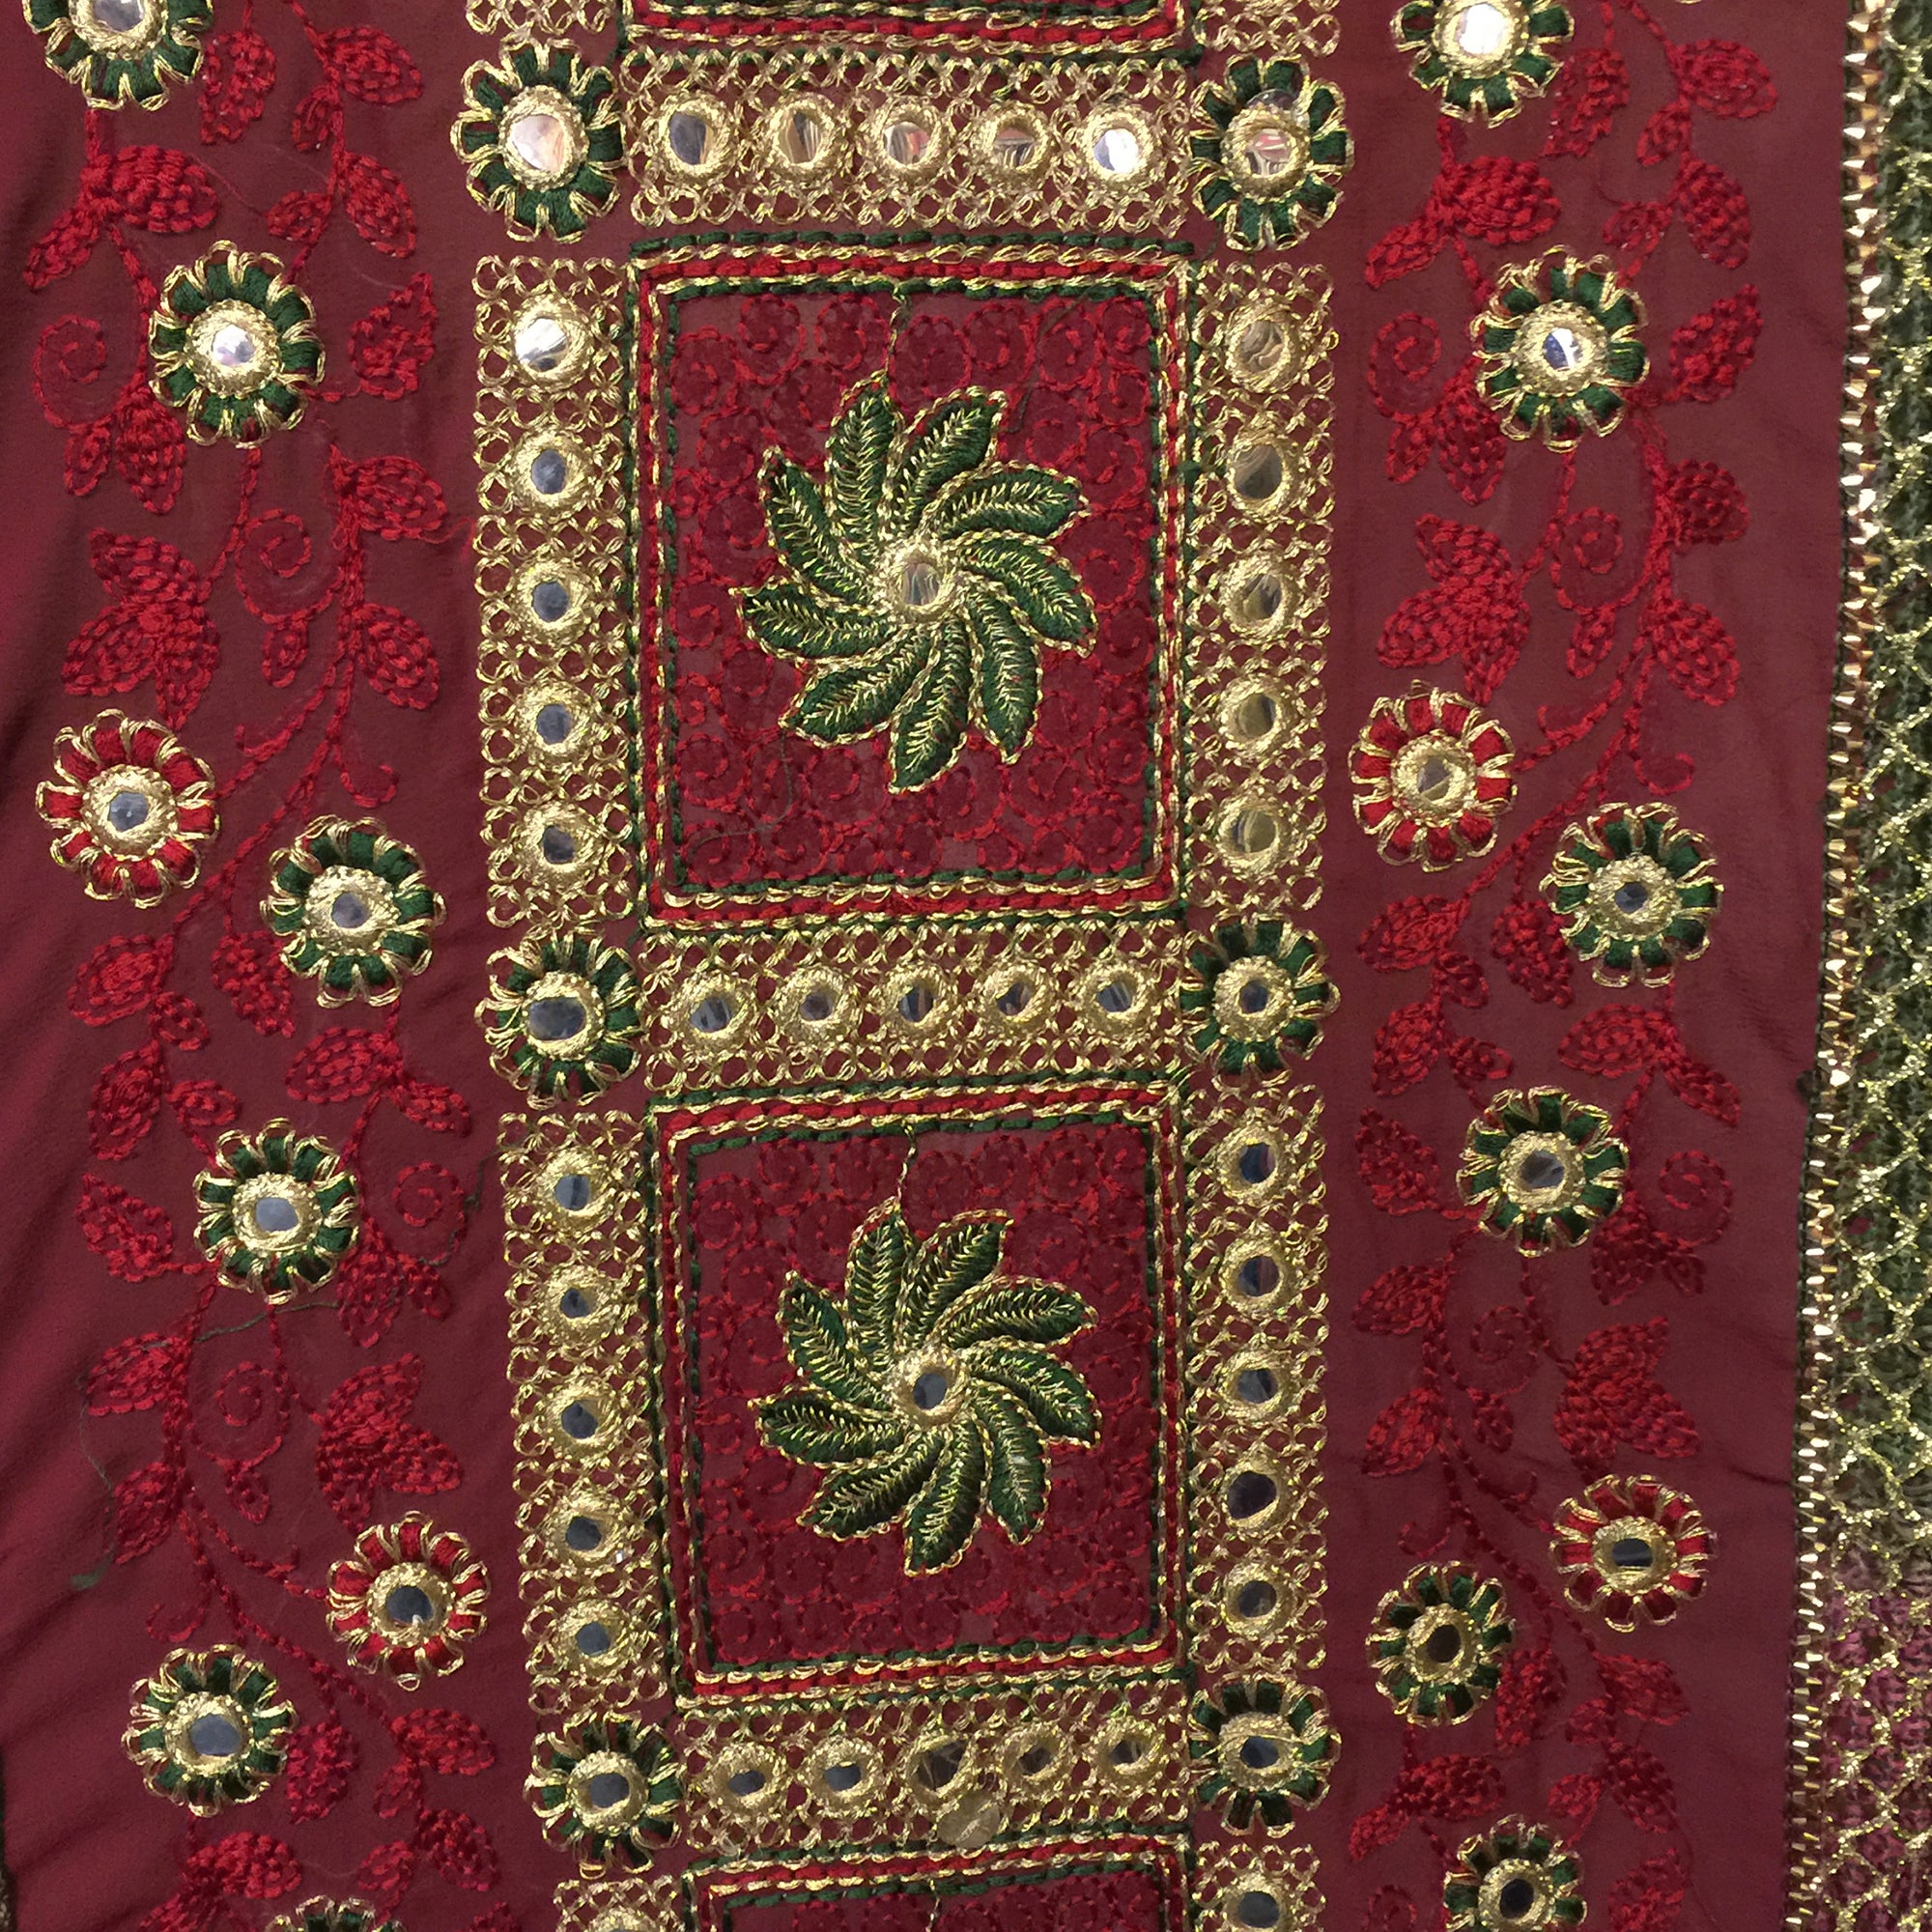 Single Curtains-Reds - Vintage India NYC